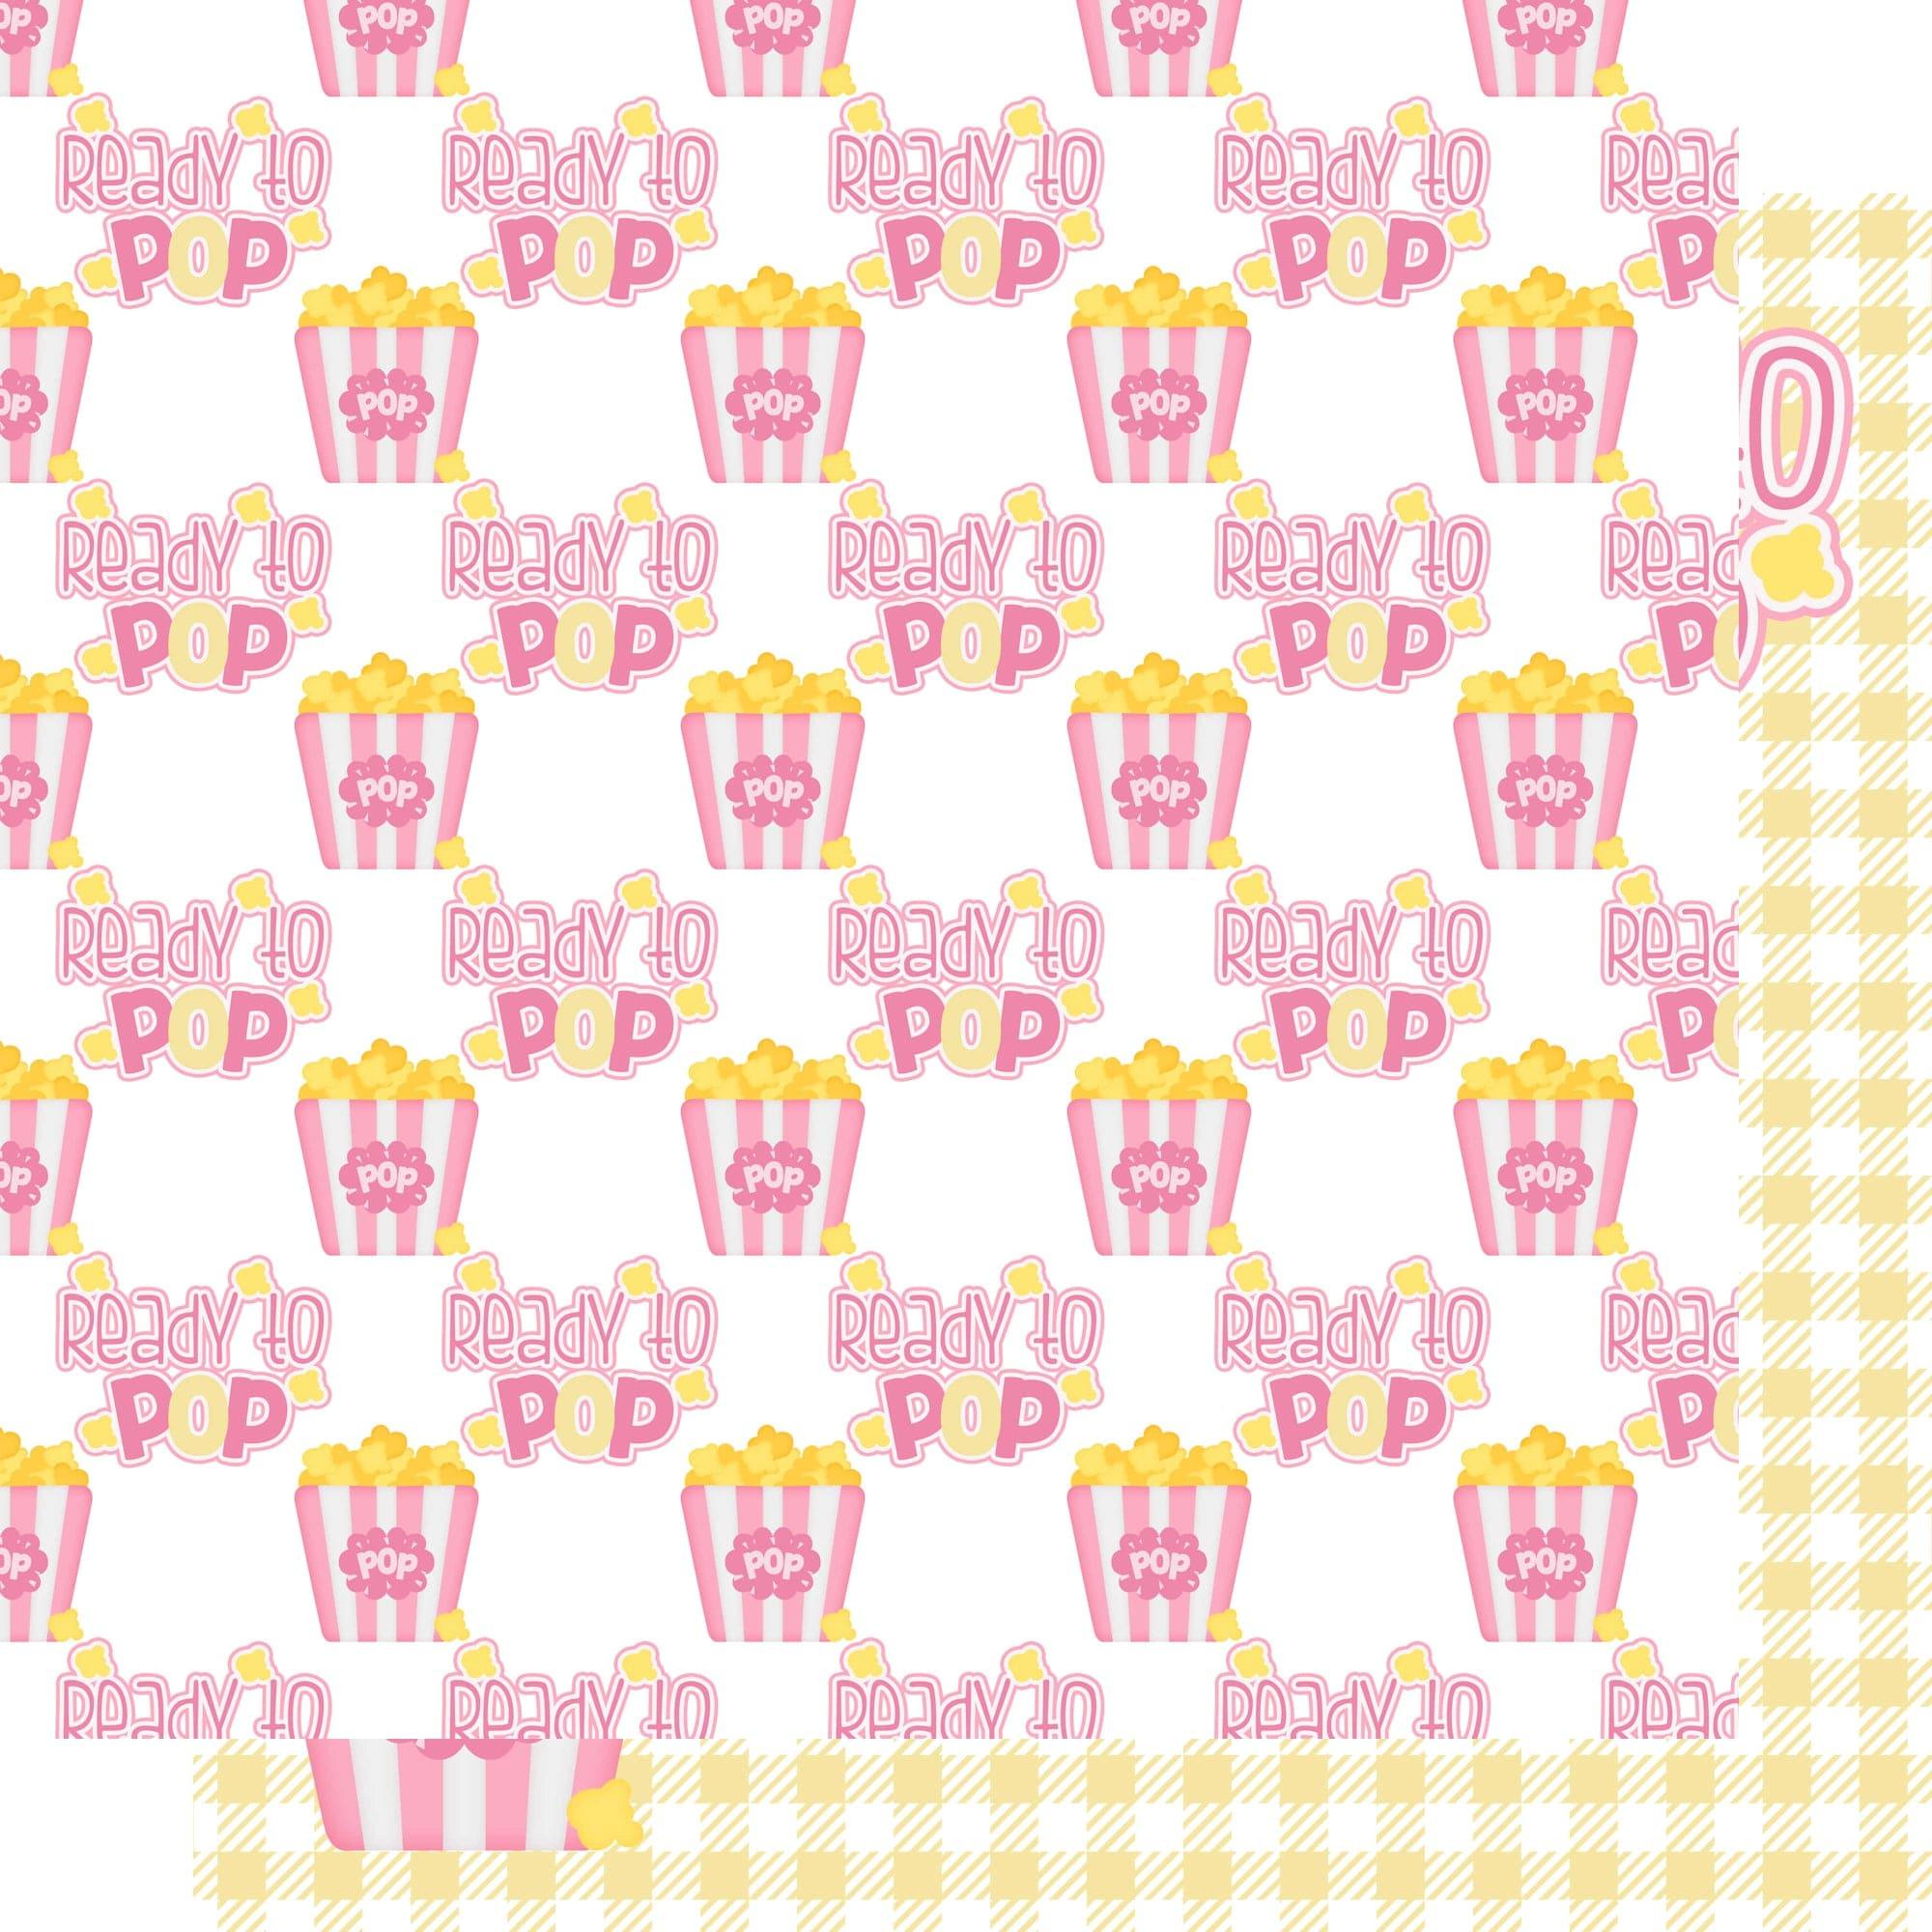 Ready To Pop Collection Ready To Pop Girl 12 x 12 Double-Sided Scrapbook Paper by SSC Designs - Scrapbook Supply Companies